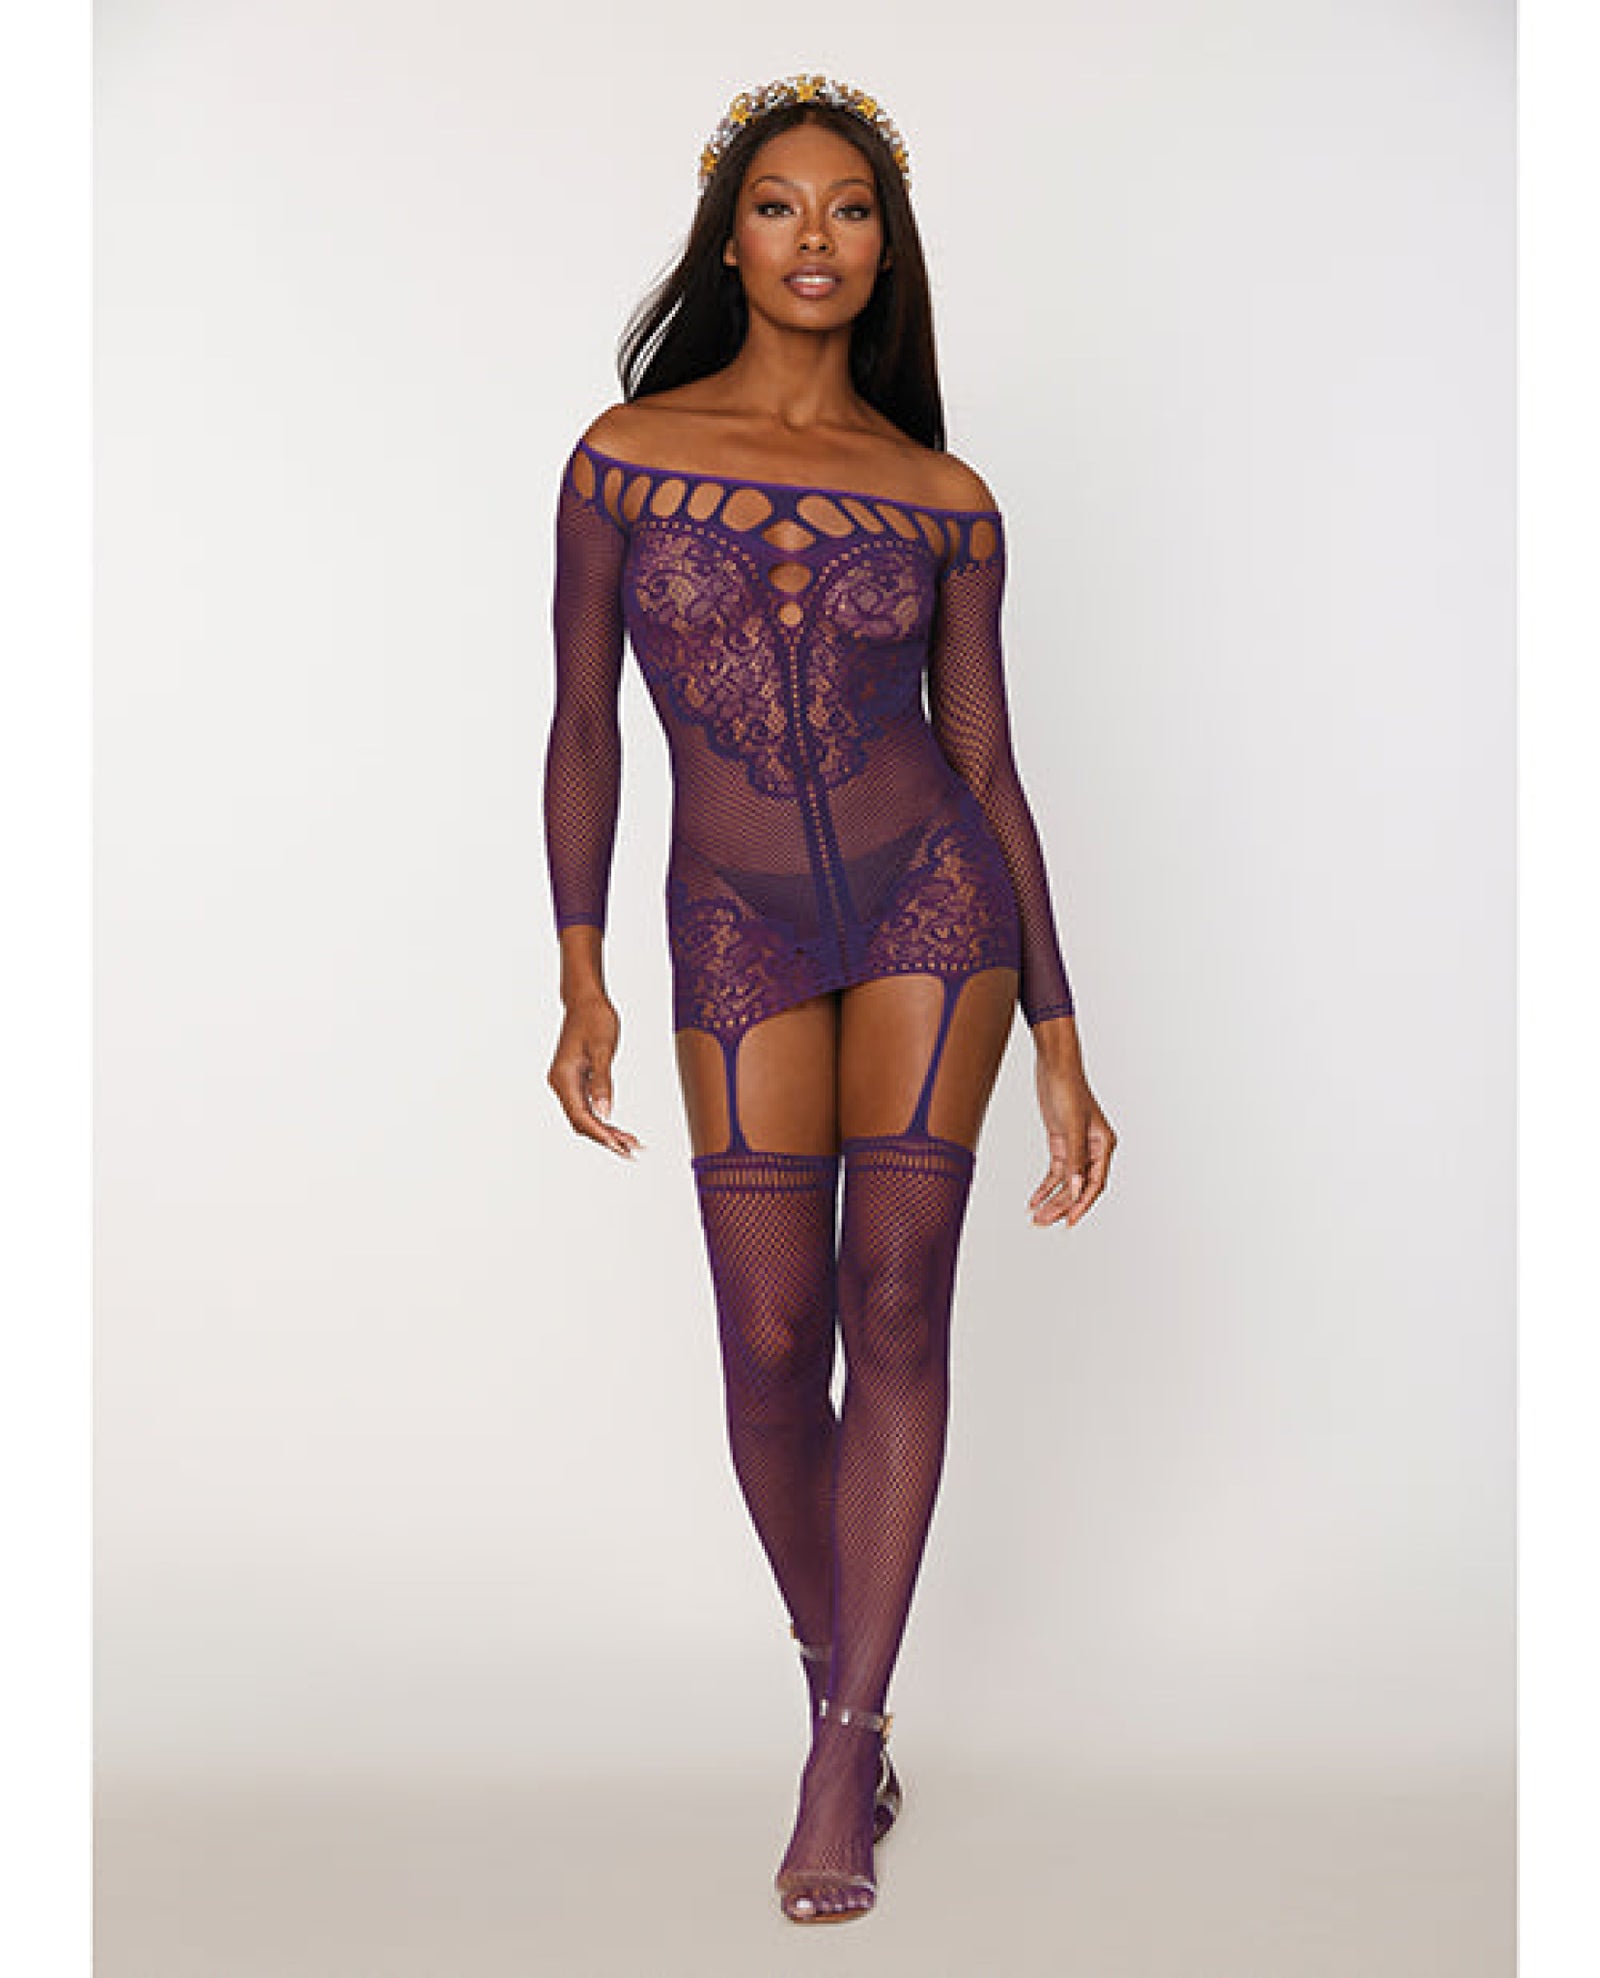 Scalloped Lace and Fishnet Garter Dress w/Attached Stockings - Purple O/S Dreamgirl International